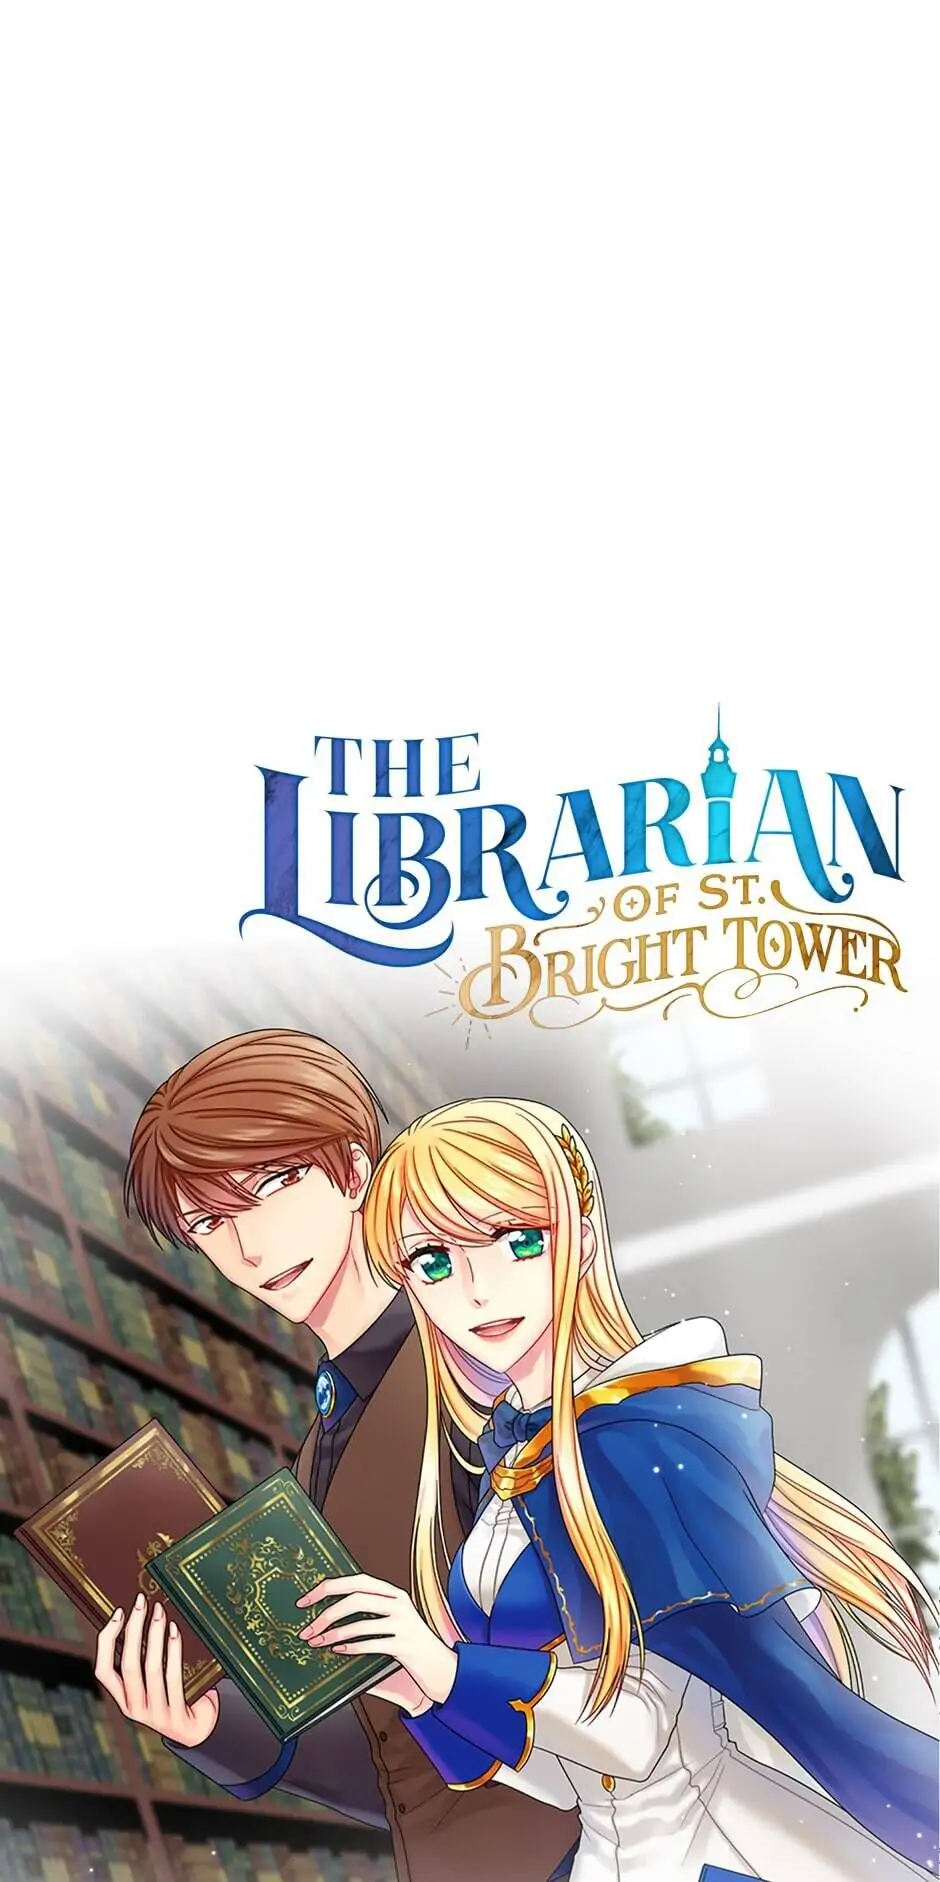 The Magic Tower Librarian chapter 24